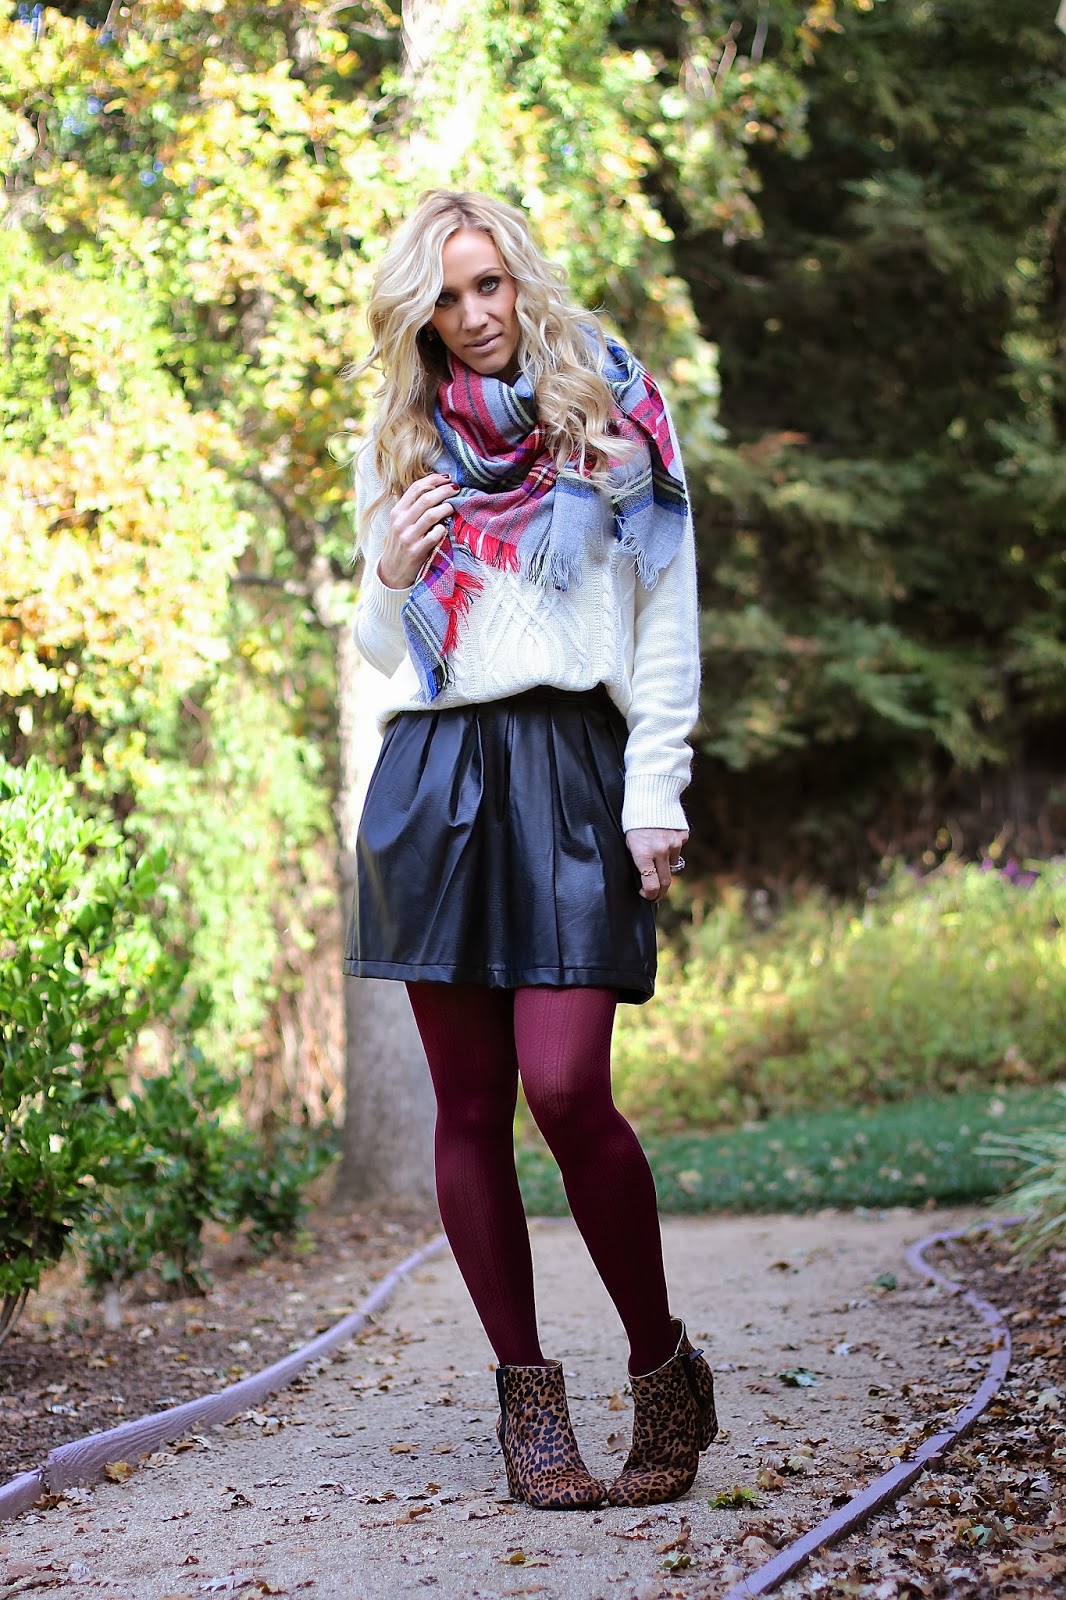 The Parlor Girl: 12 Days of Christmas Giveaway: Day 1 & Burgundy Tights